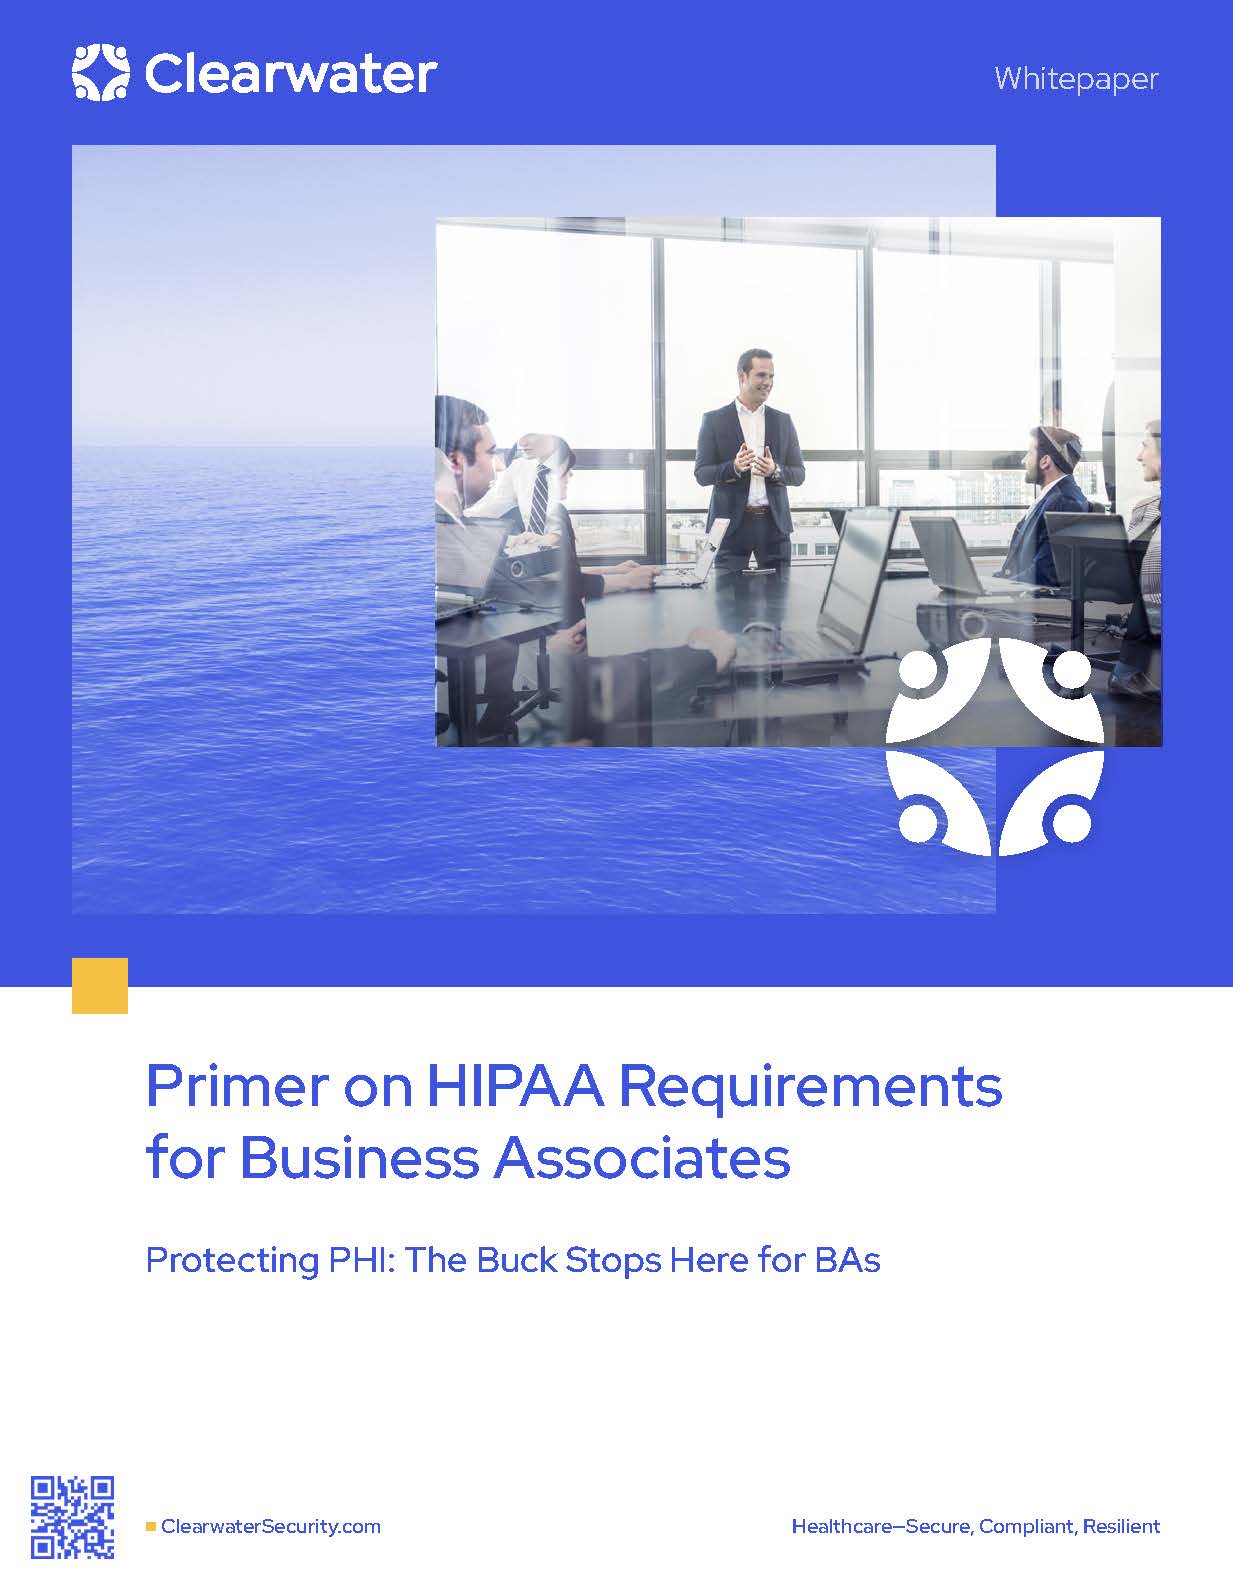 Primer on HIPAA Requirements for Business Associates by Clearwater